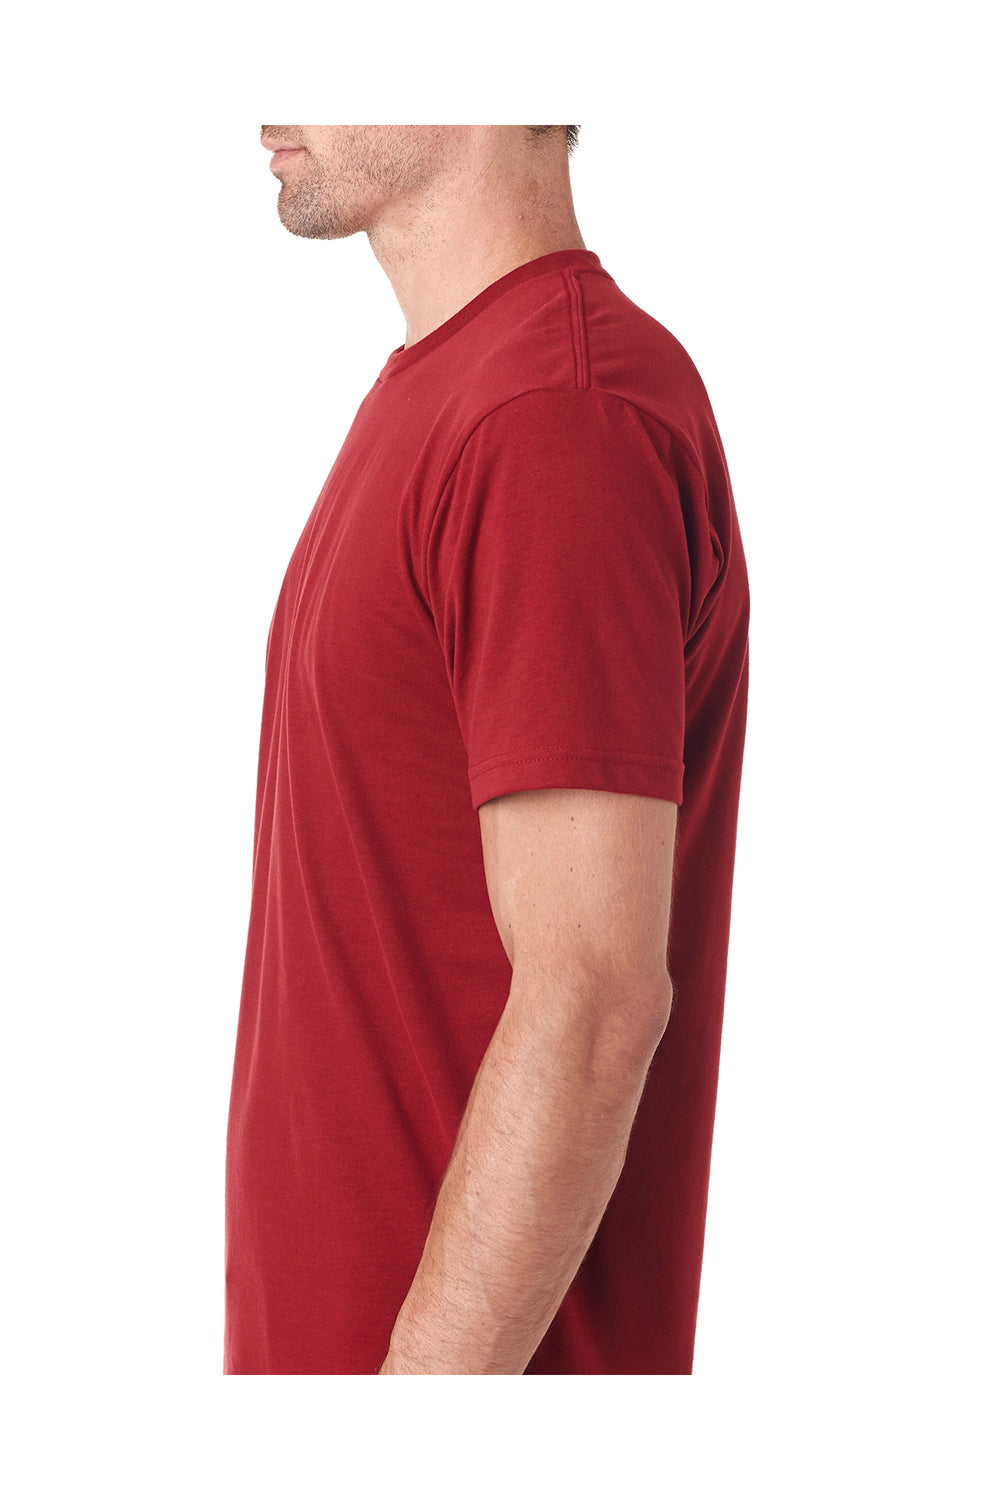 Next Level 6410 Mens Sueded Jersey Short Sleeve Crewneck T-Shirt Cardinal Red Side